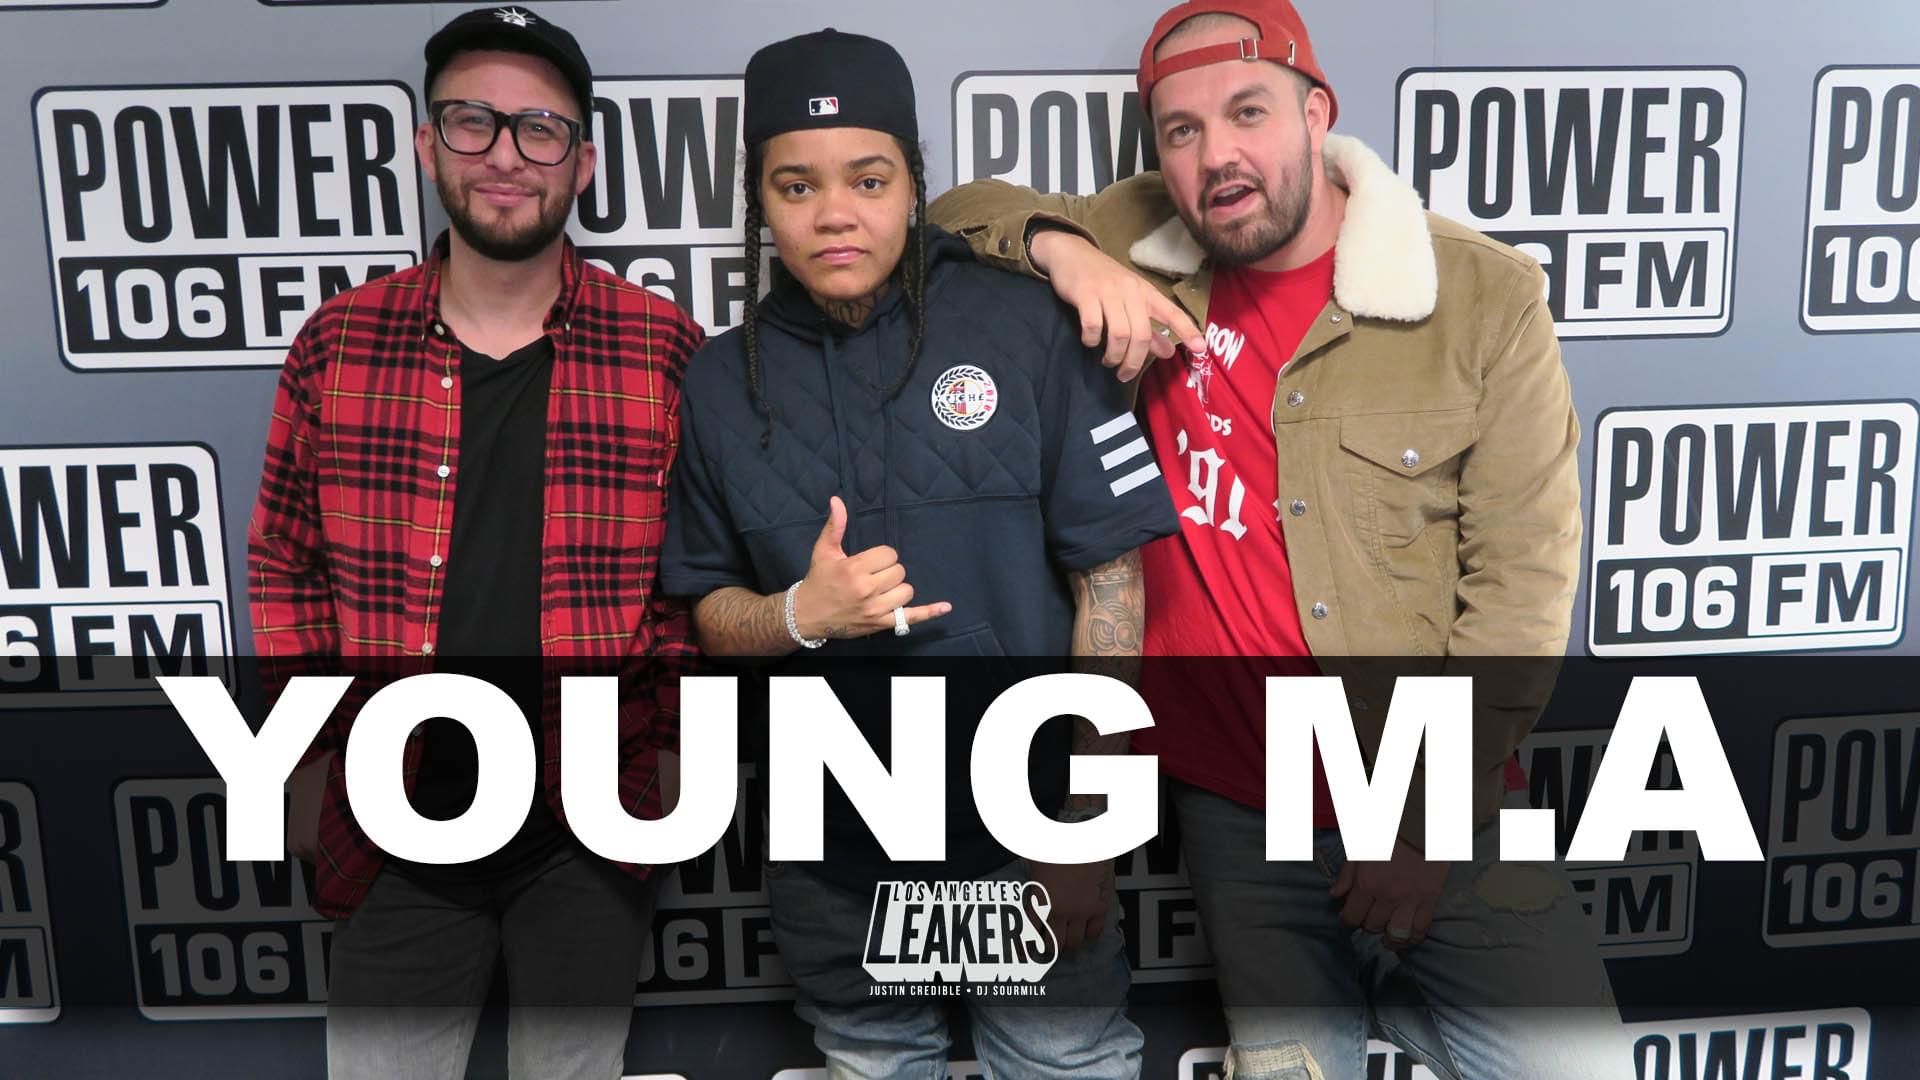 LA Leakers Young M.A Interview: Talks Queen of Rap & Unspoken Relationship with Tori Brixx